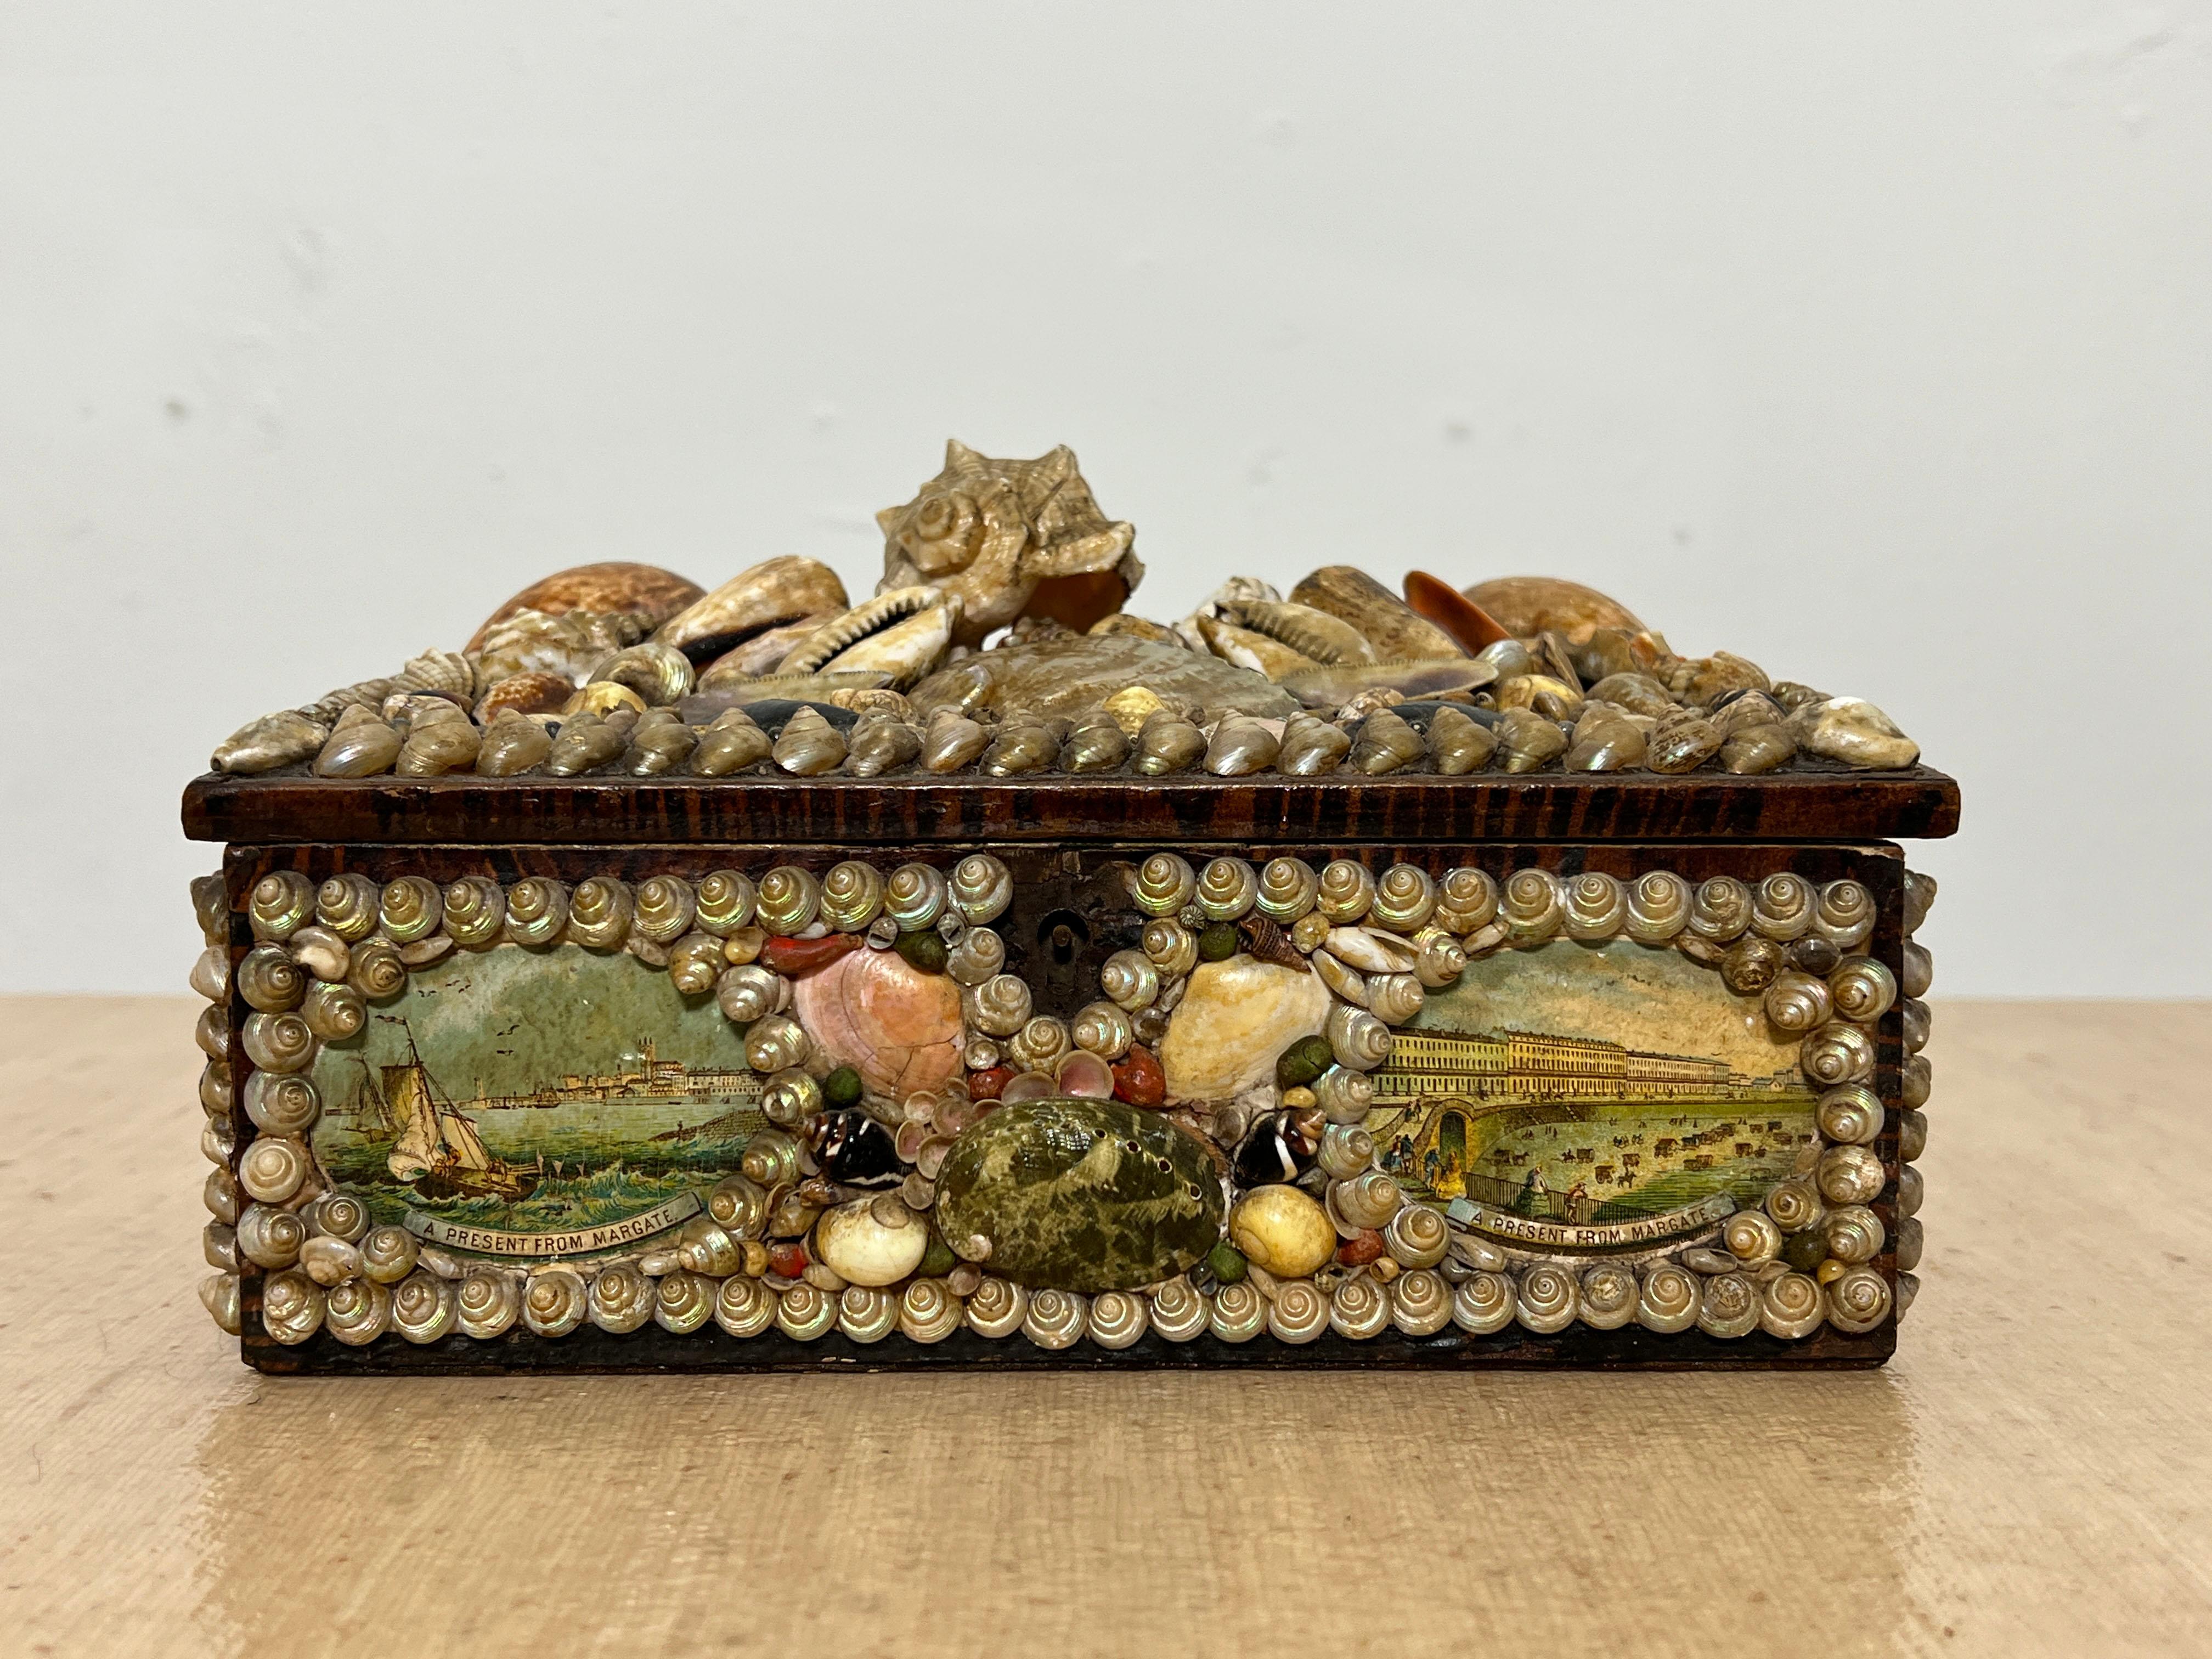 Victorian era seashell decorated souvenir box from the famed Margate Grotto in England.  Two panoramic panels depict the Margate resort.